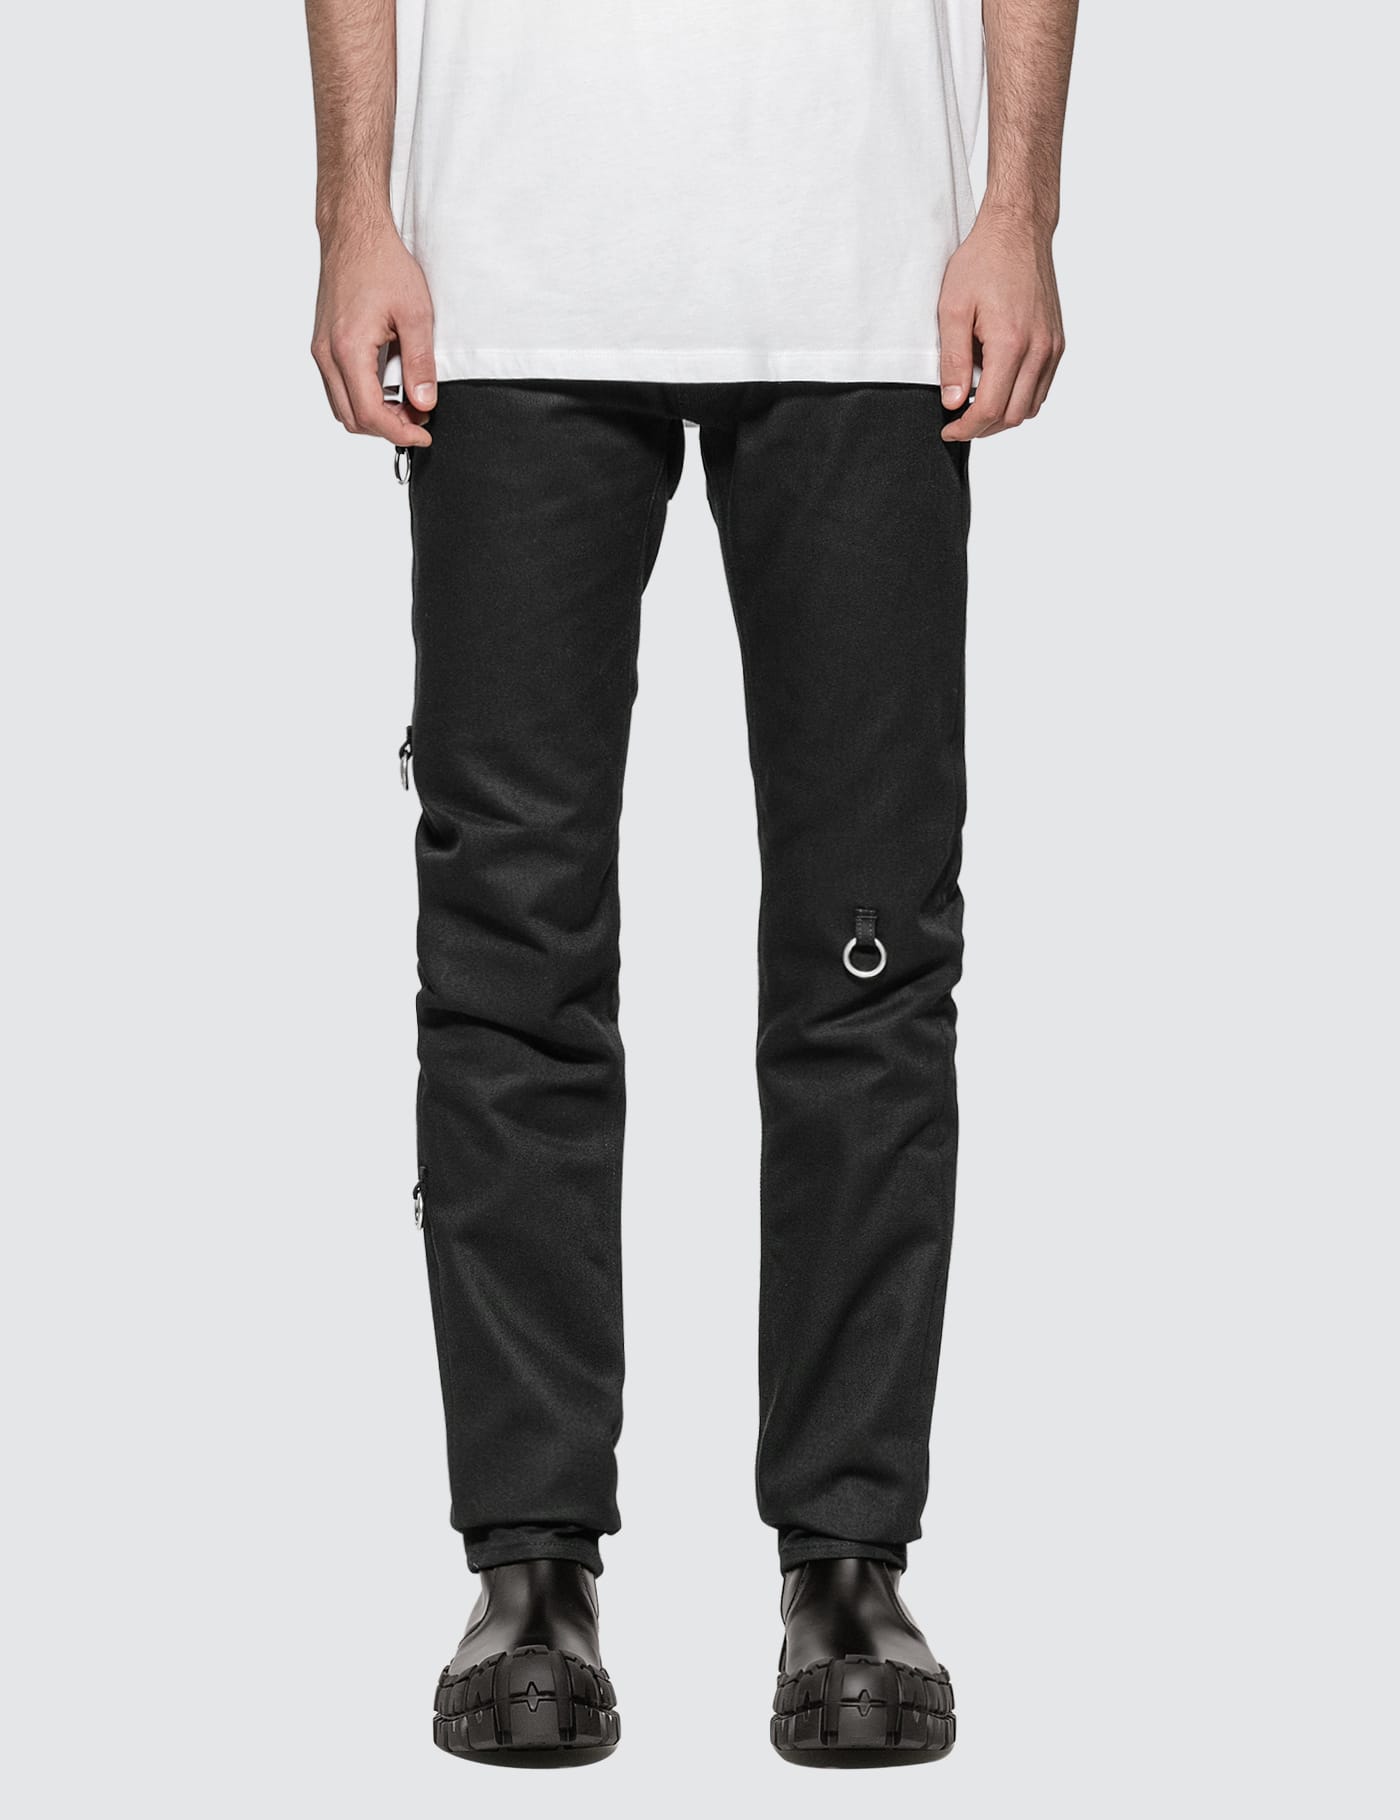 Raf Simons - Slim Fit Jeans With Rings | HBX - Globally Curated Fashion and  Lifestyle by Hypebeast